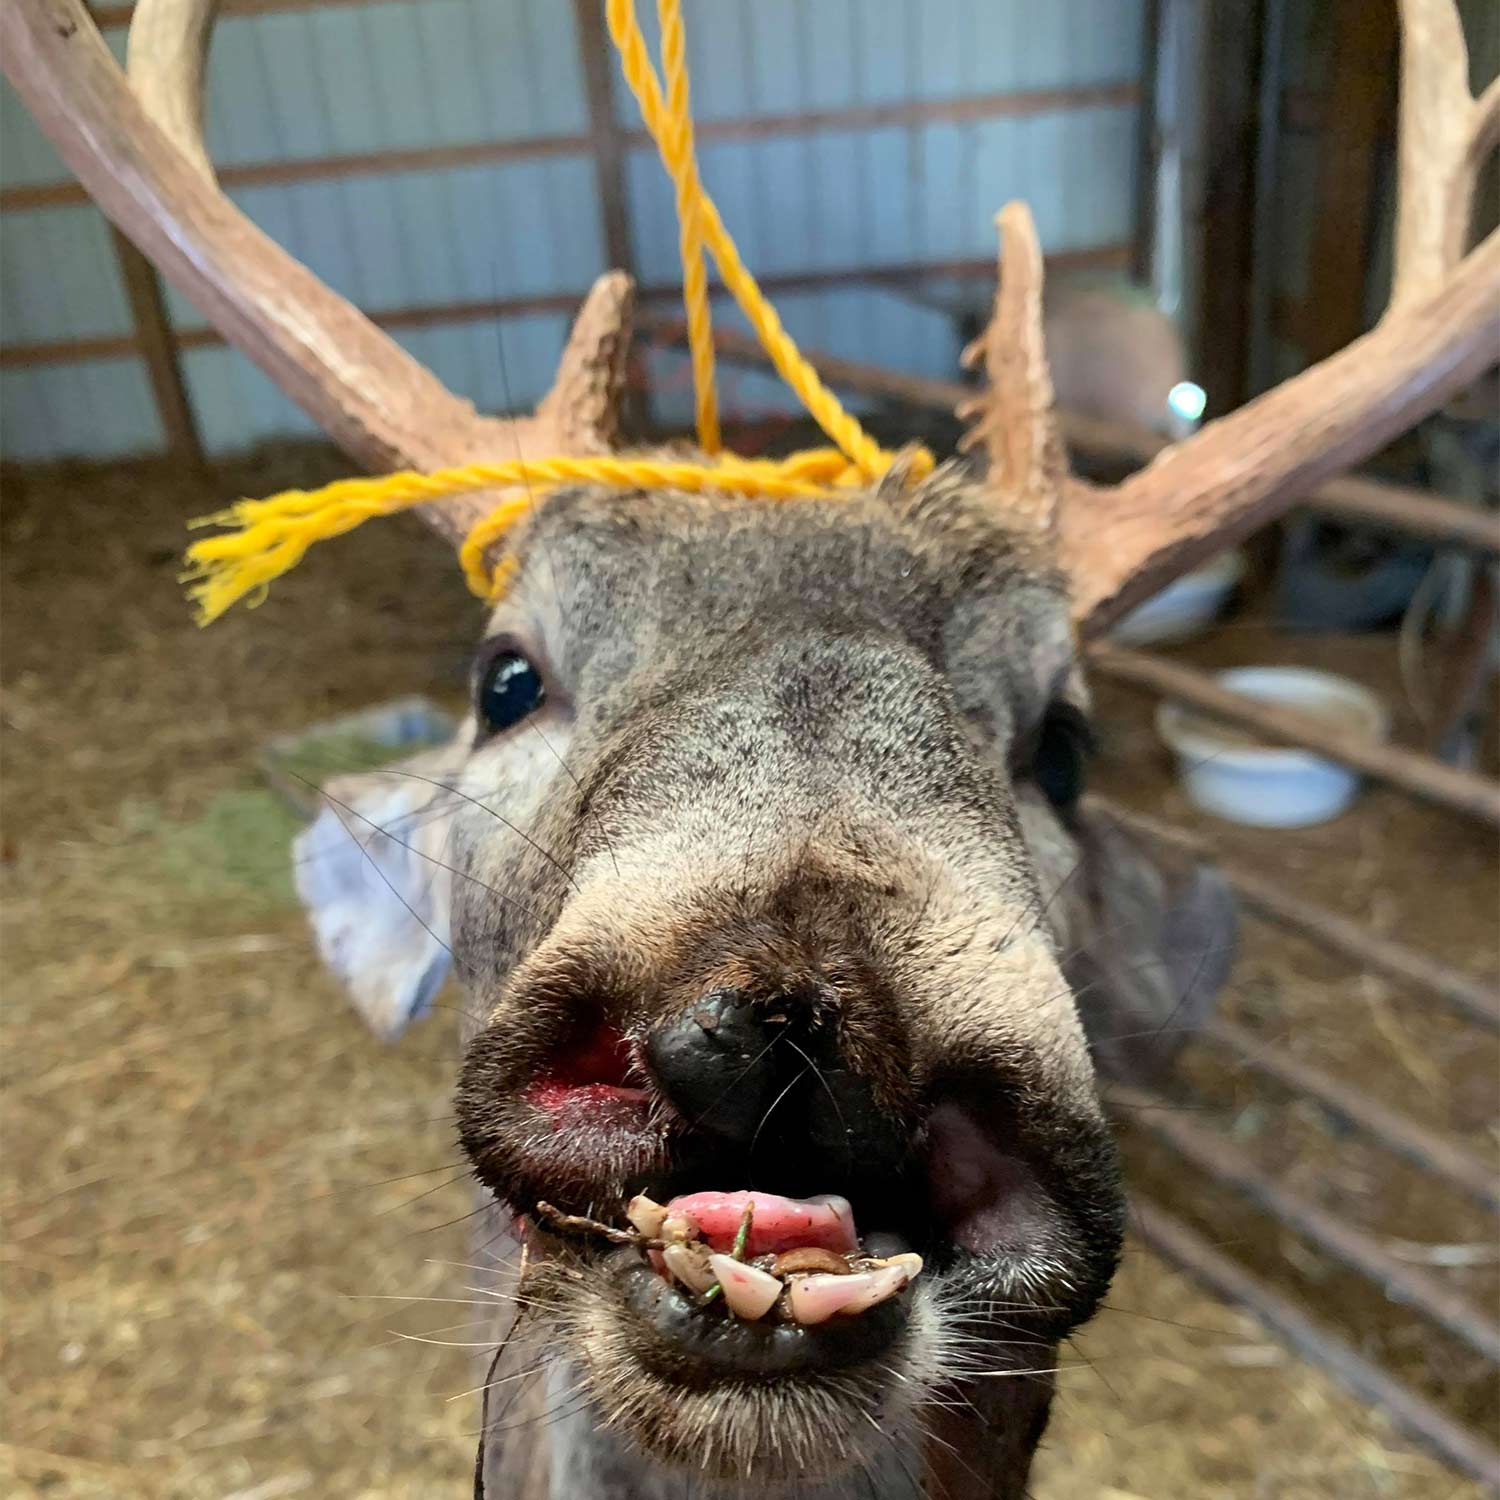 A deer with misshapen mouth